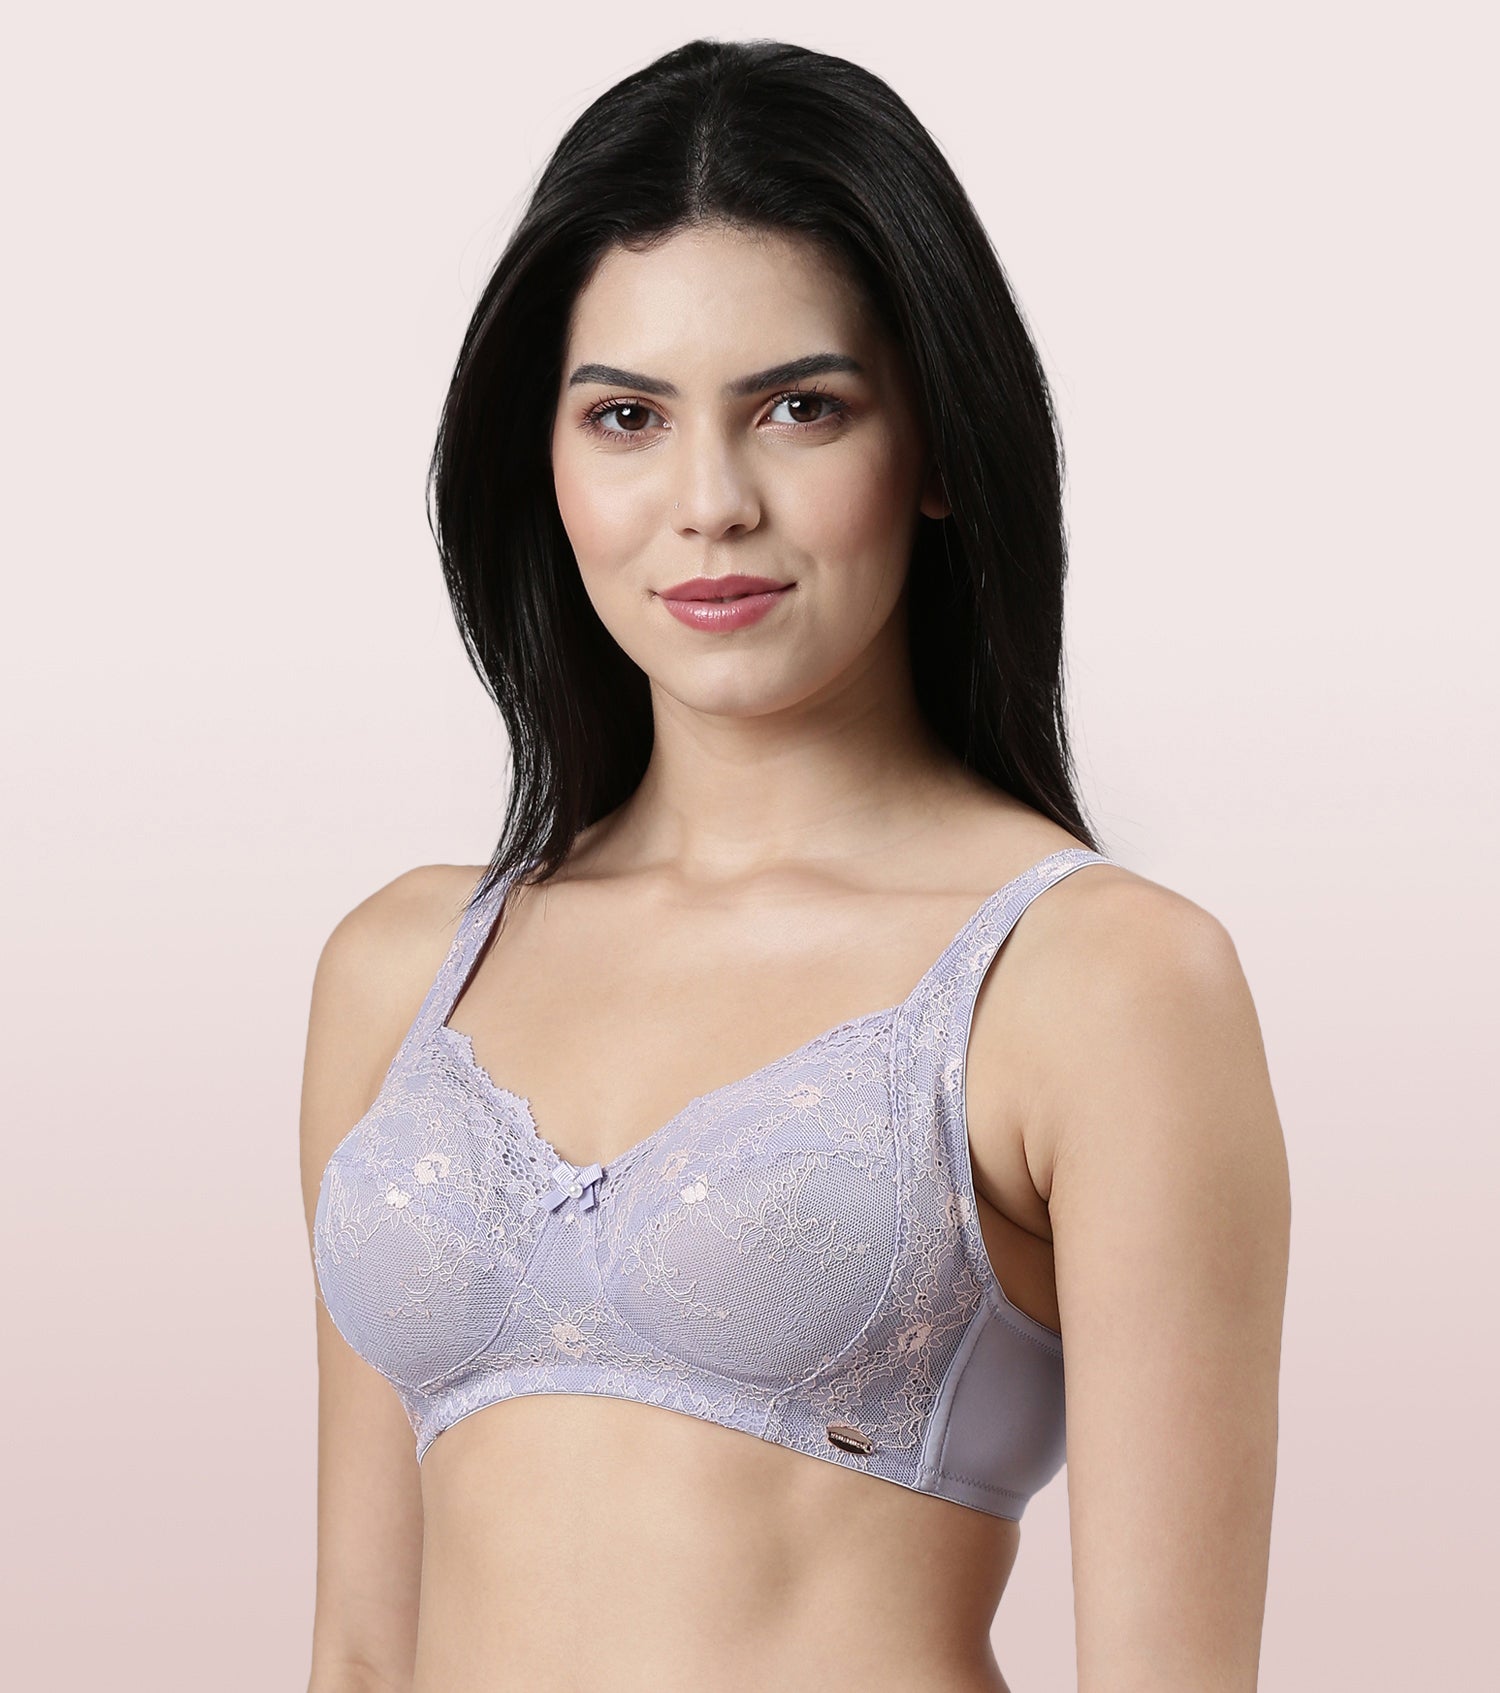 Butterfly Cleavage Enhancer Plunge Push-Up Bra